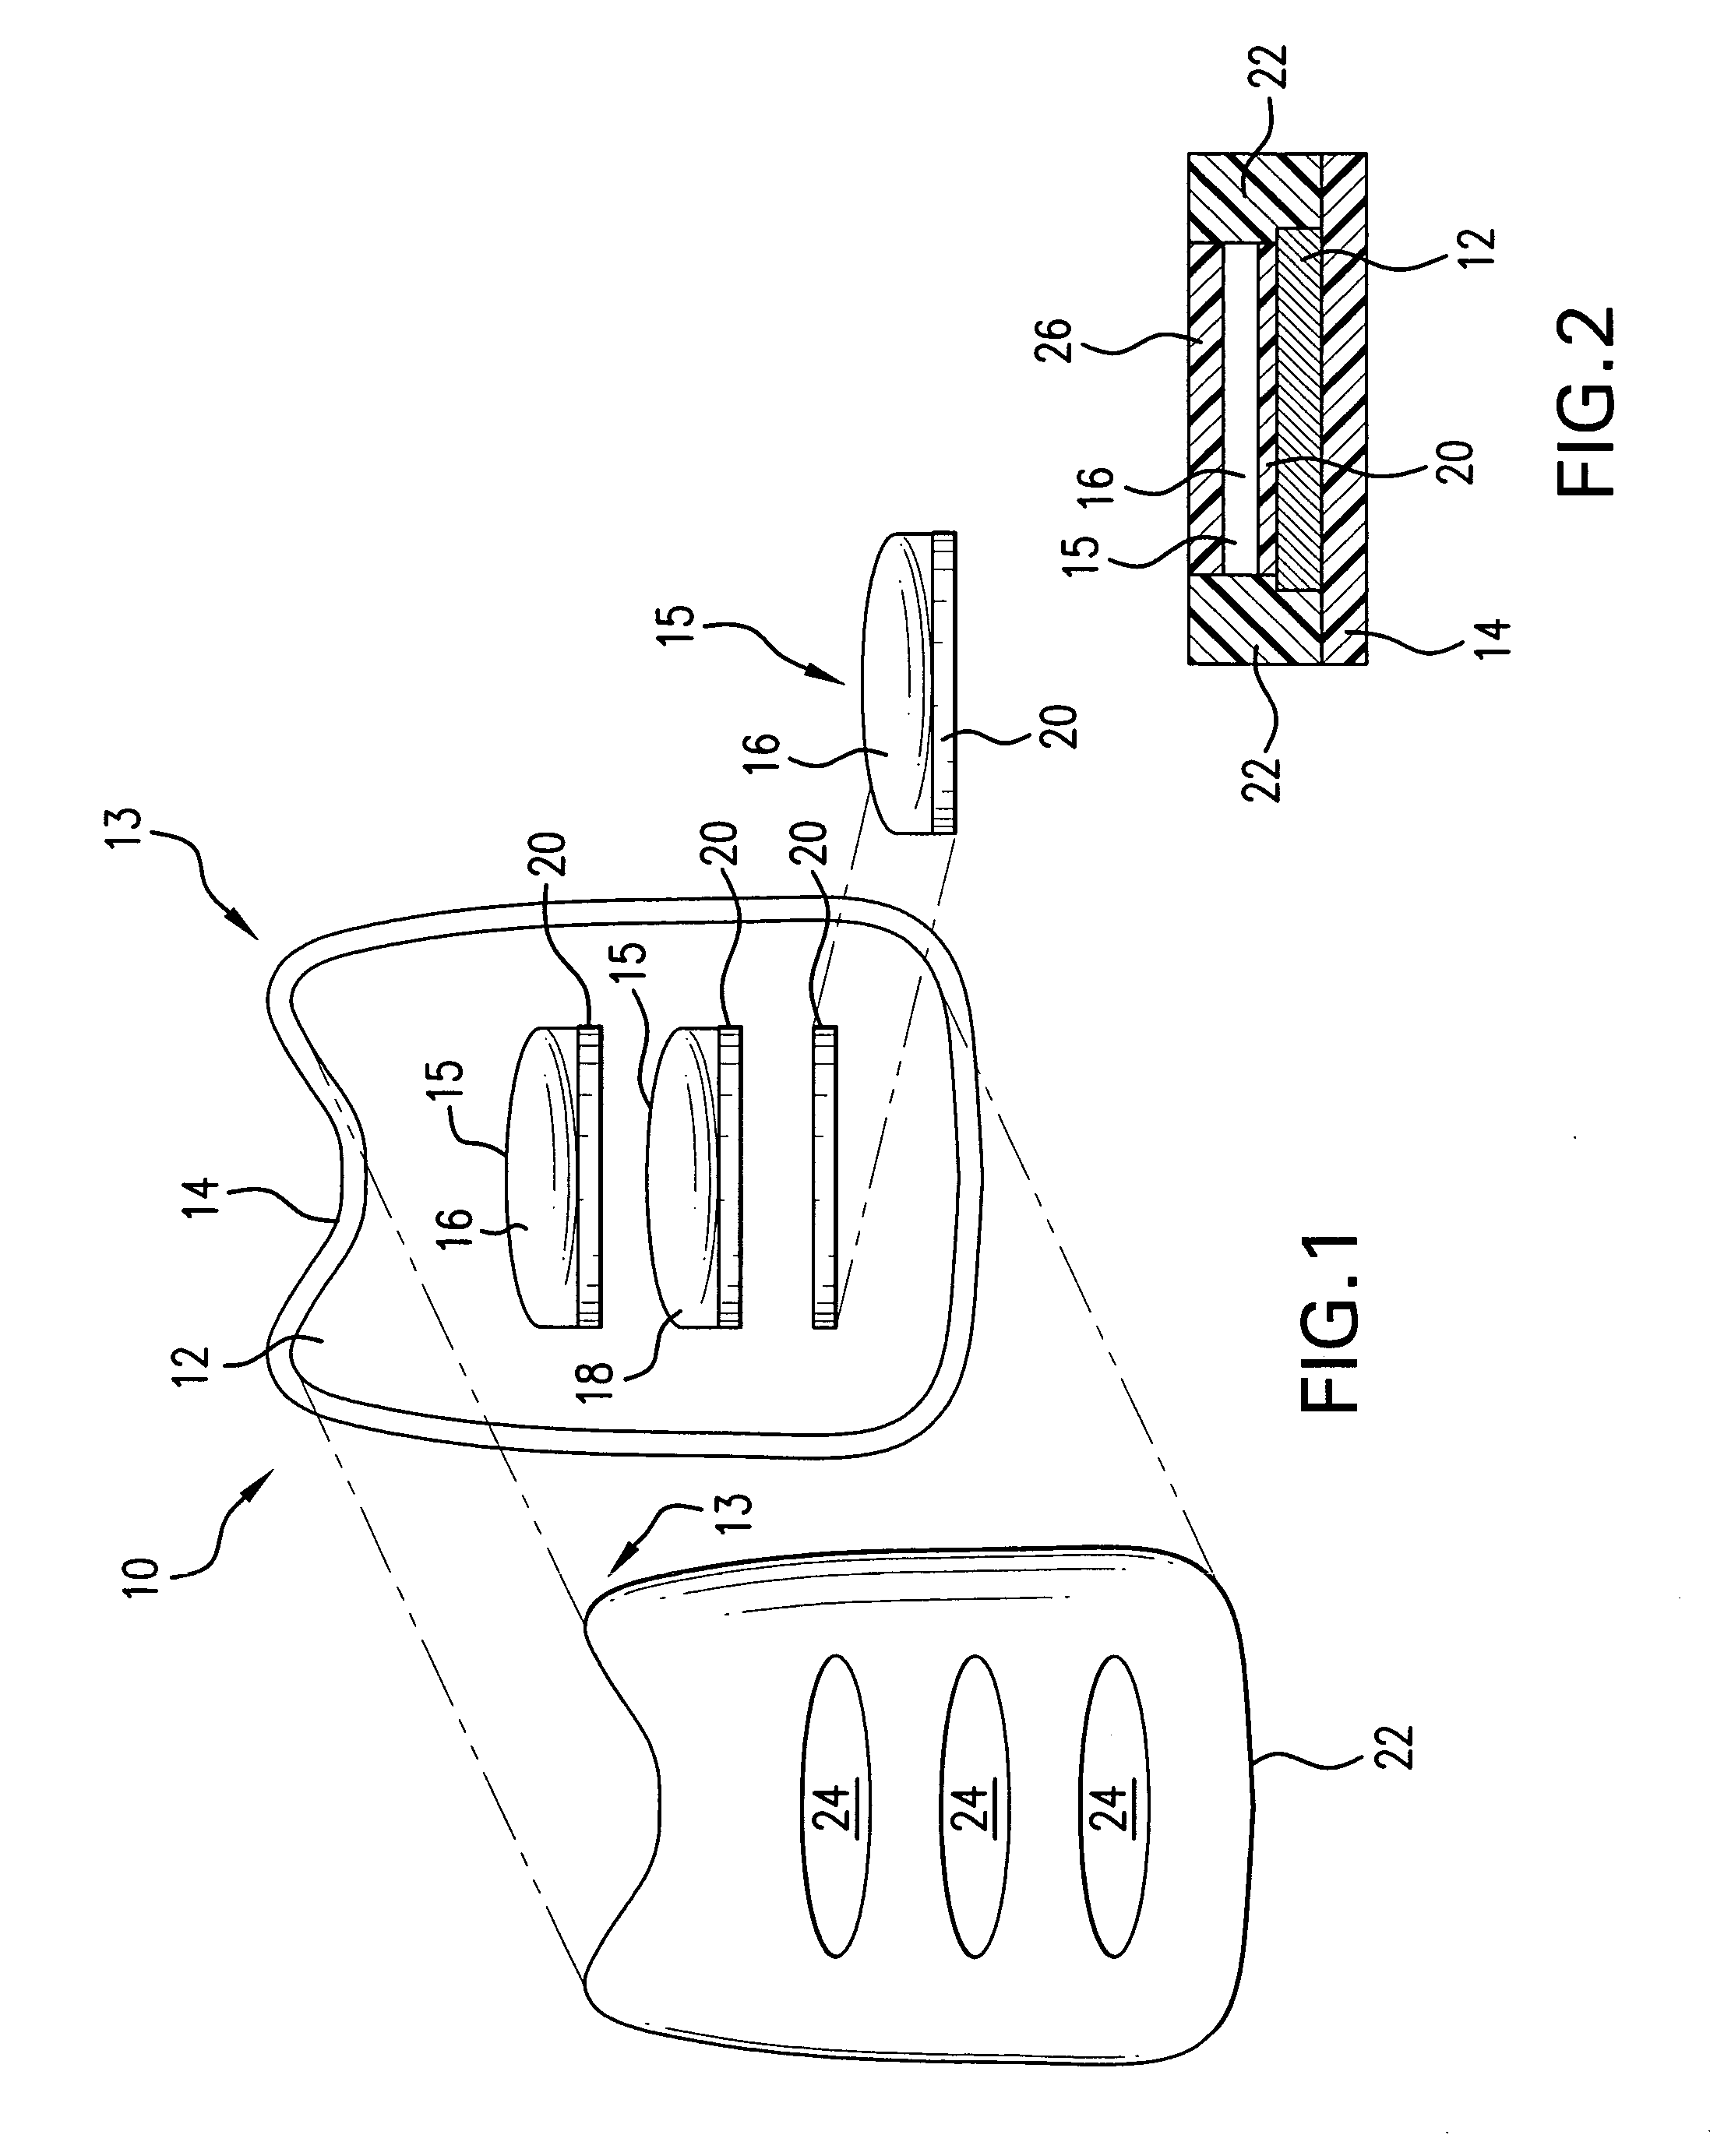 Weighted thigh pad exercise apparatus and method of use